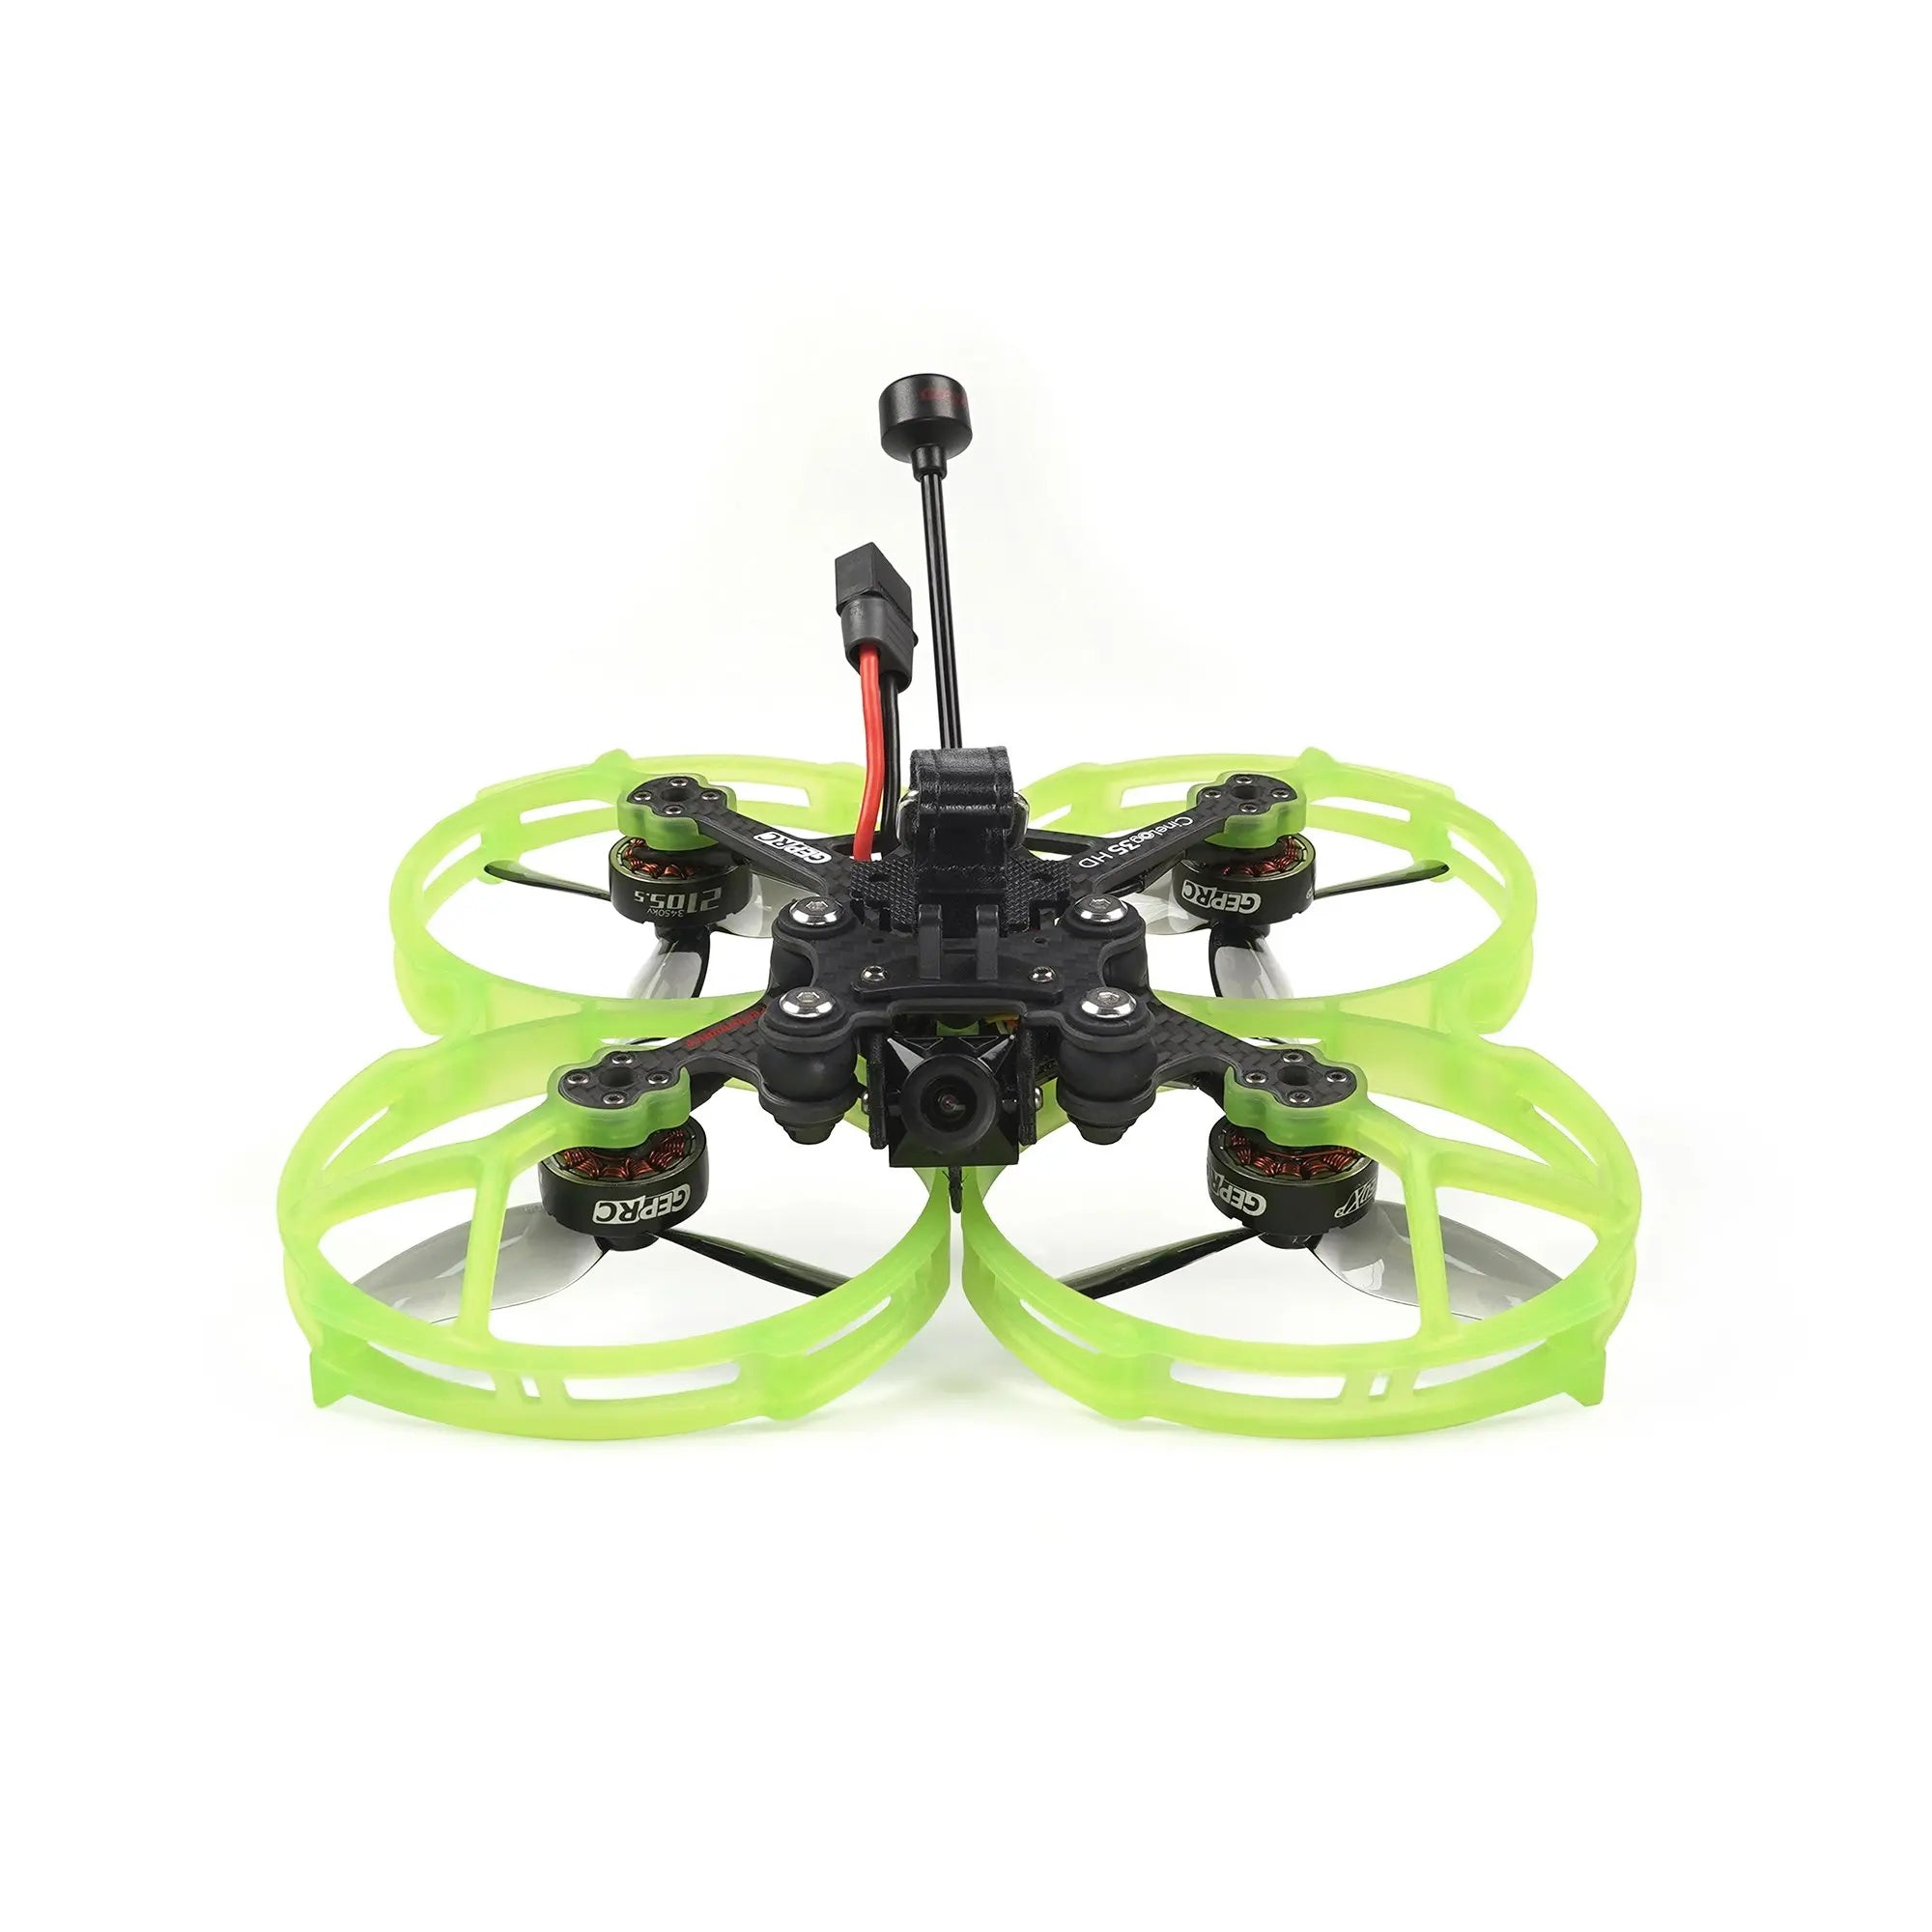 GEPRC CineLog35 FPV Drone, 7.Shock-absorbing gimbal design, more stable and clearer shooting .